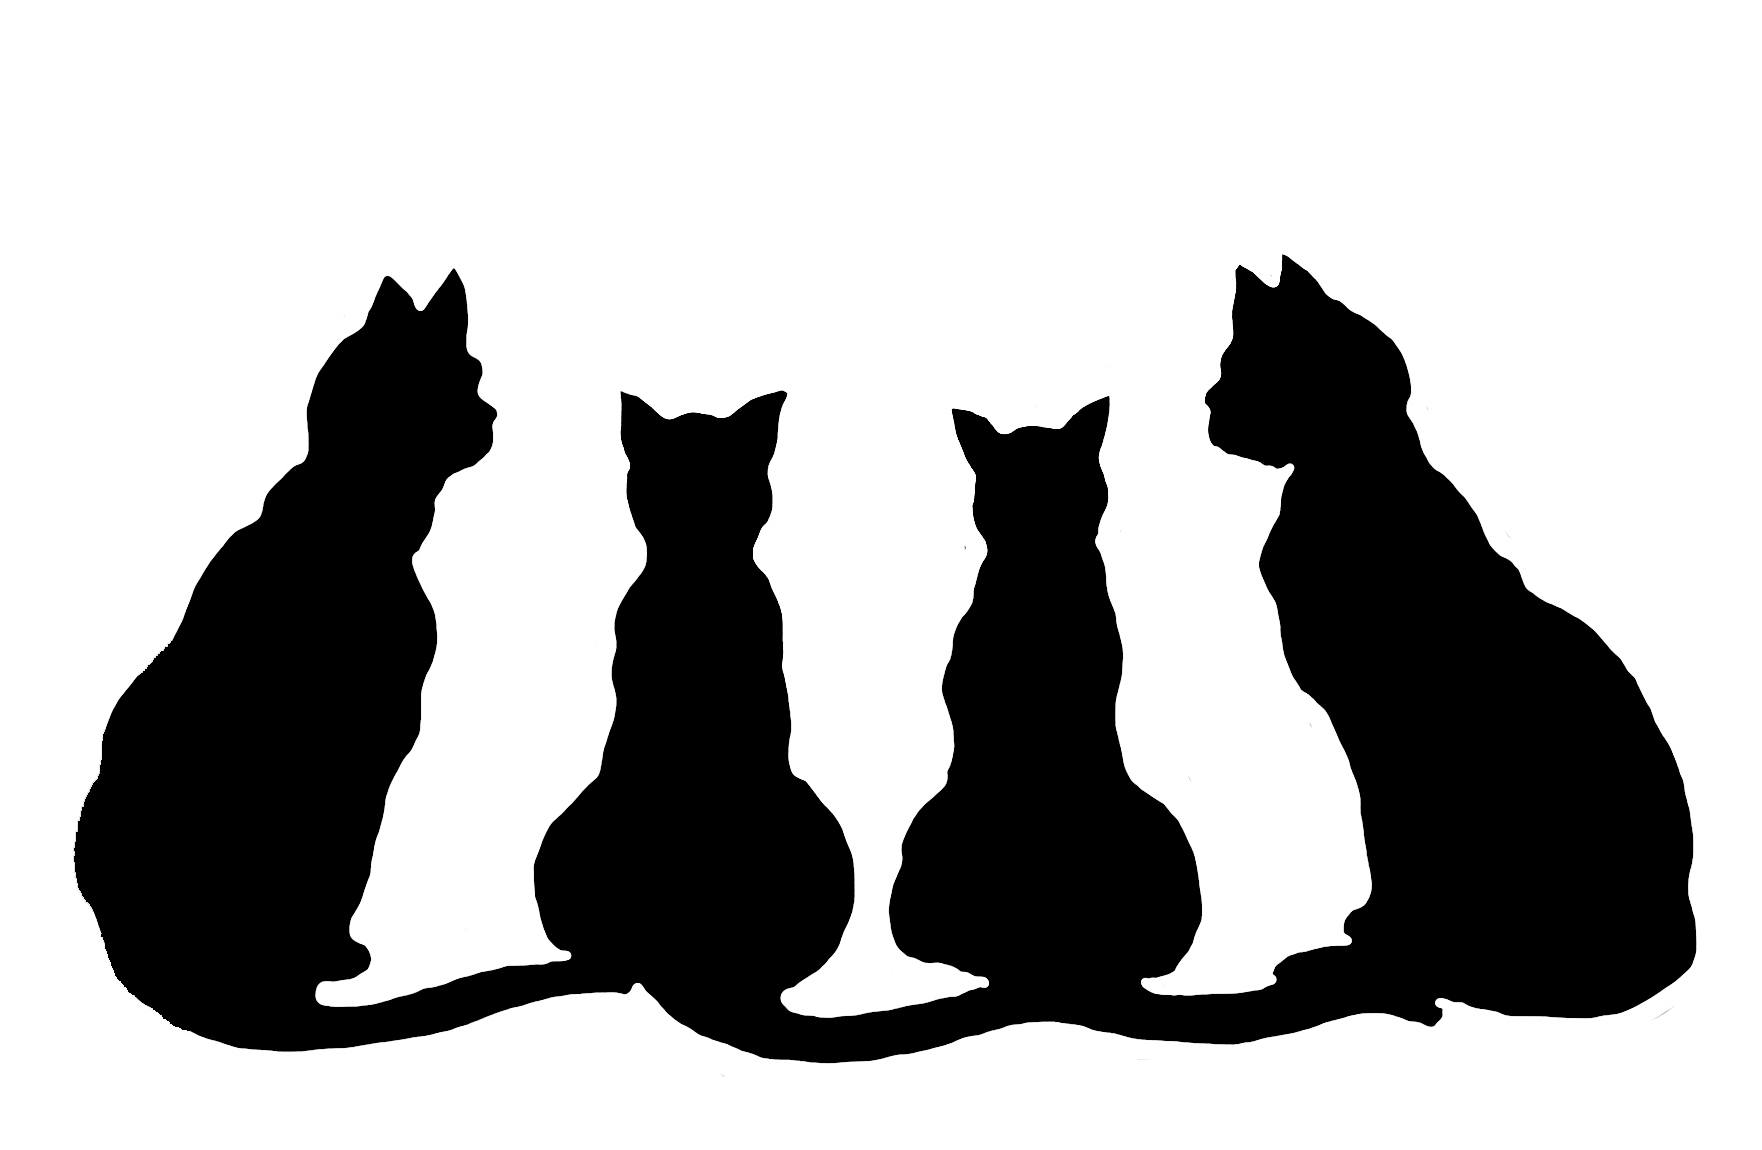 Dog And Cat Silhouette | Clipart Panda - Free Clipart Images